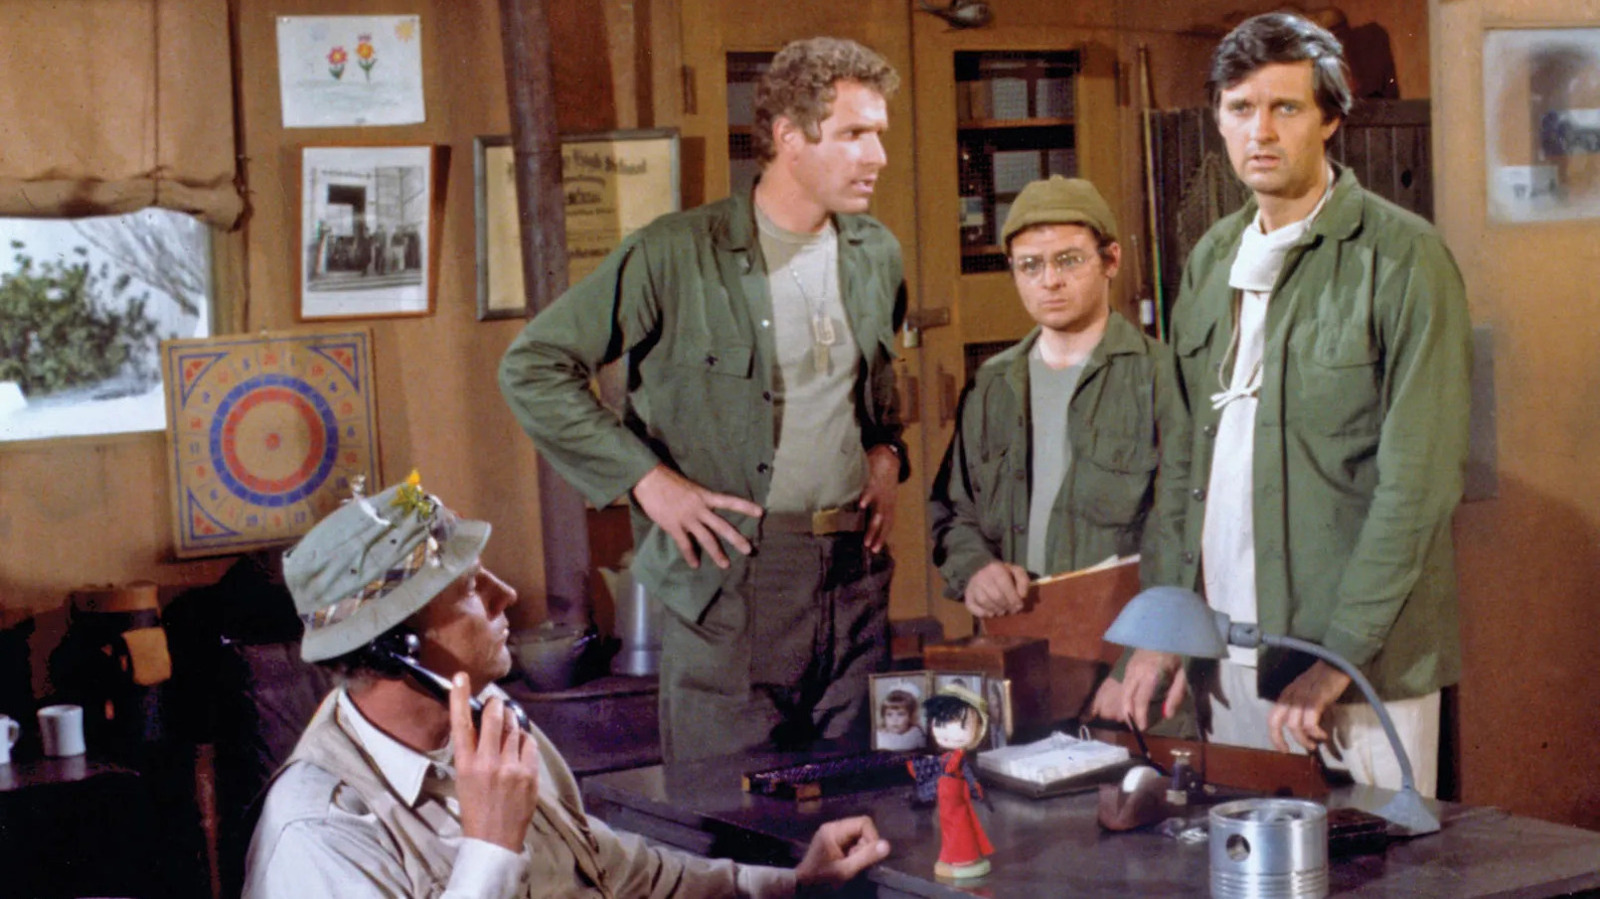 CBS Tried To Censor M*A*S*H, So Larry Gelbart Decided To Poke The Bear